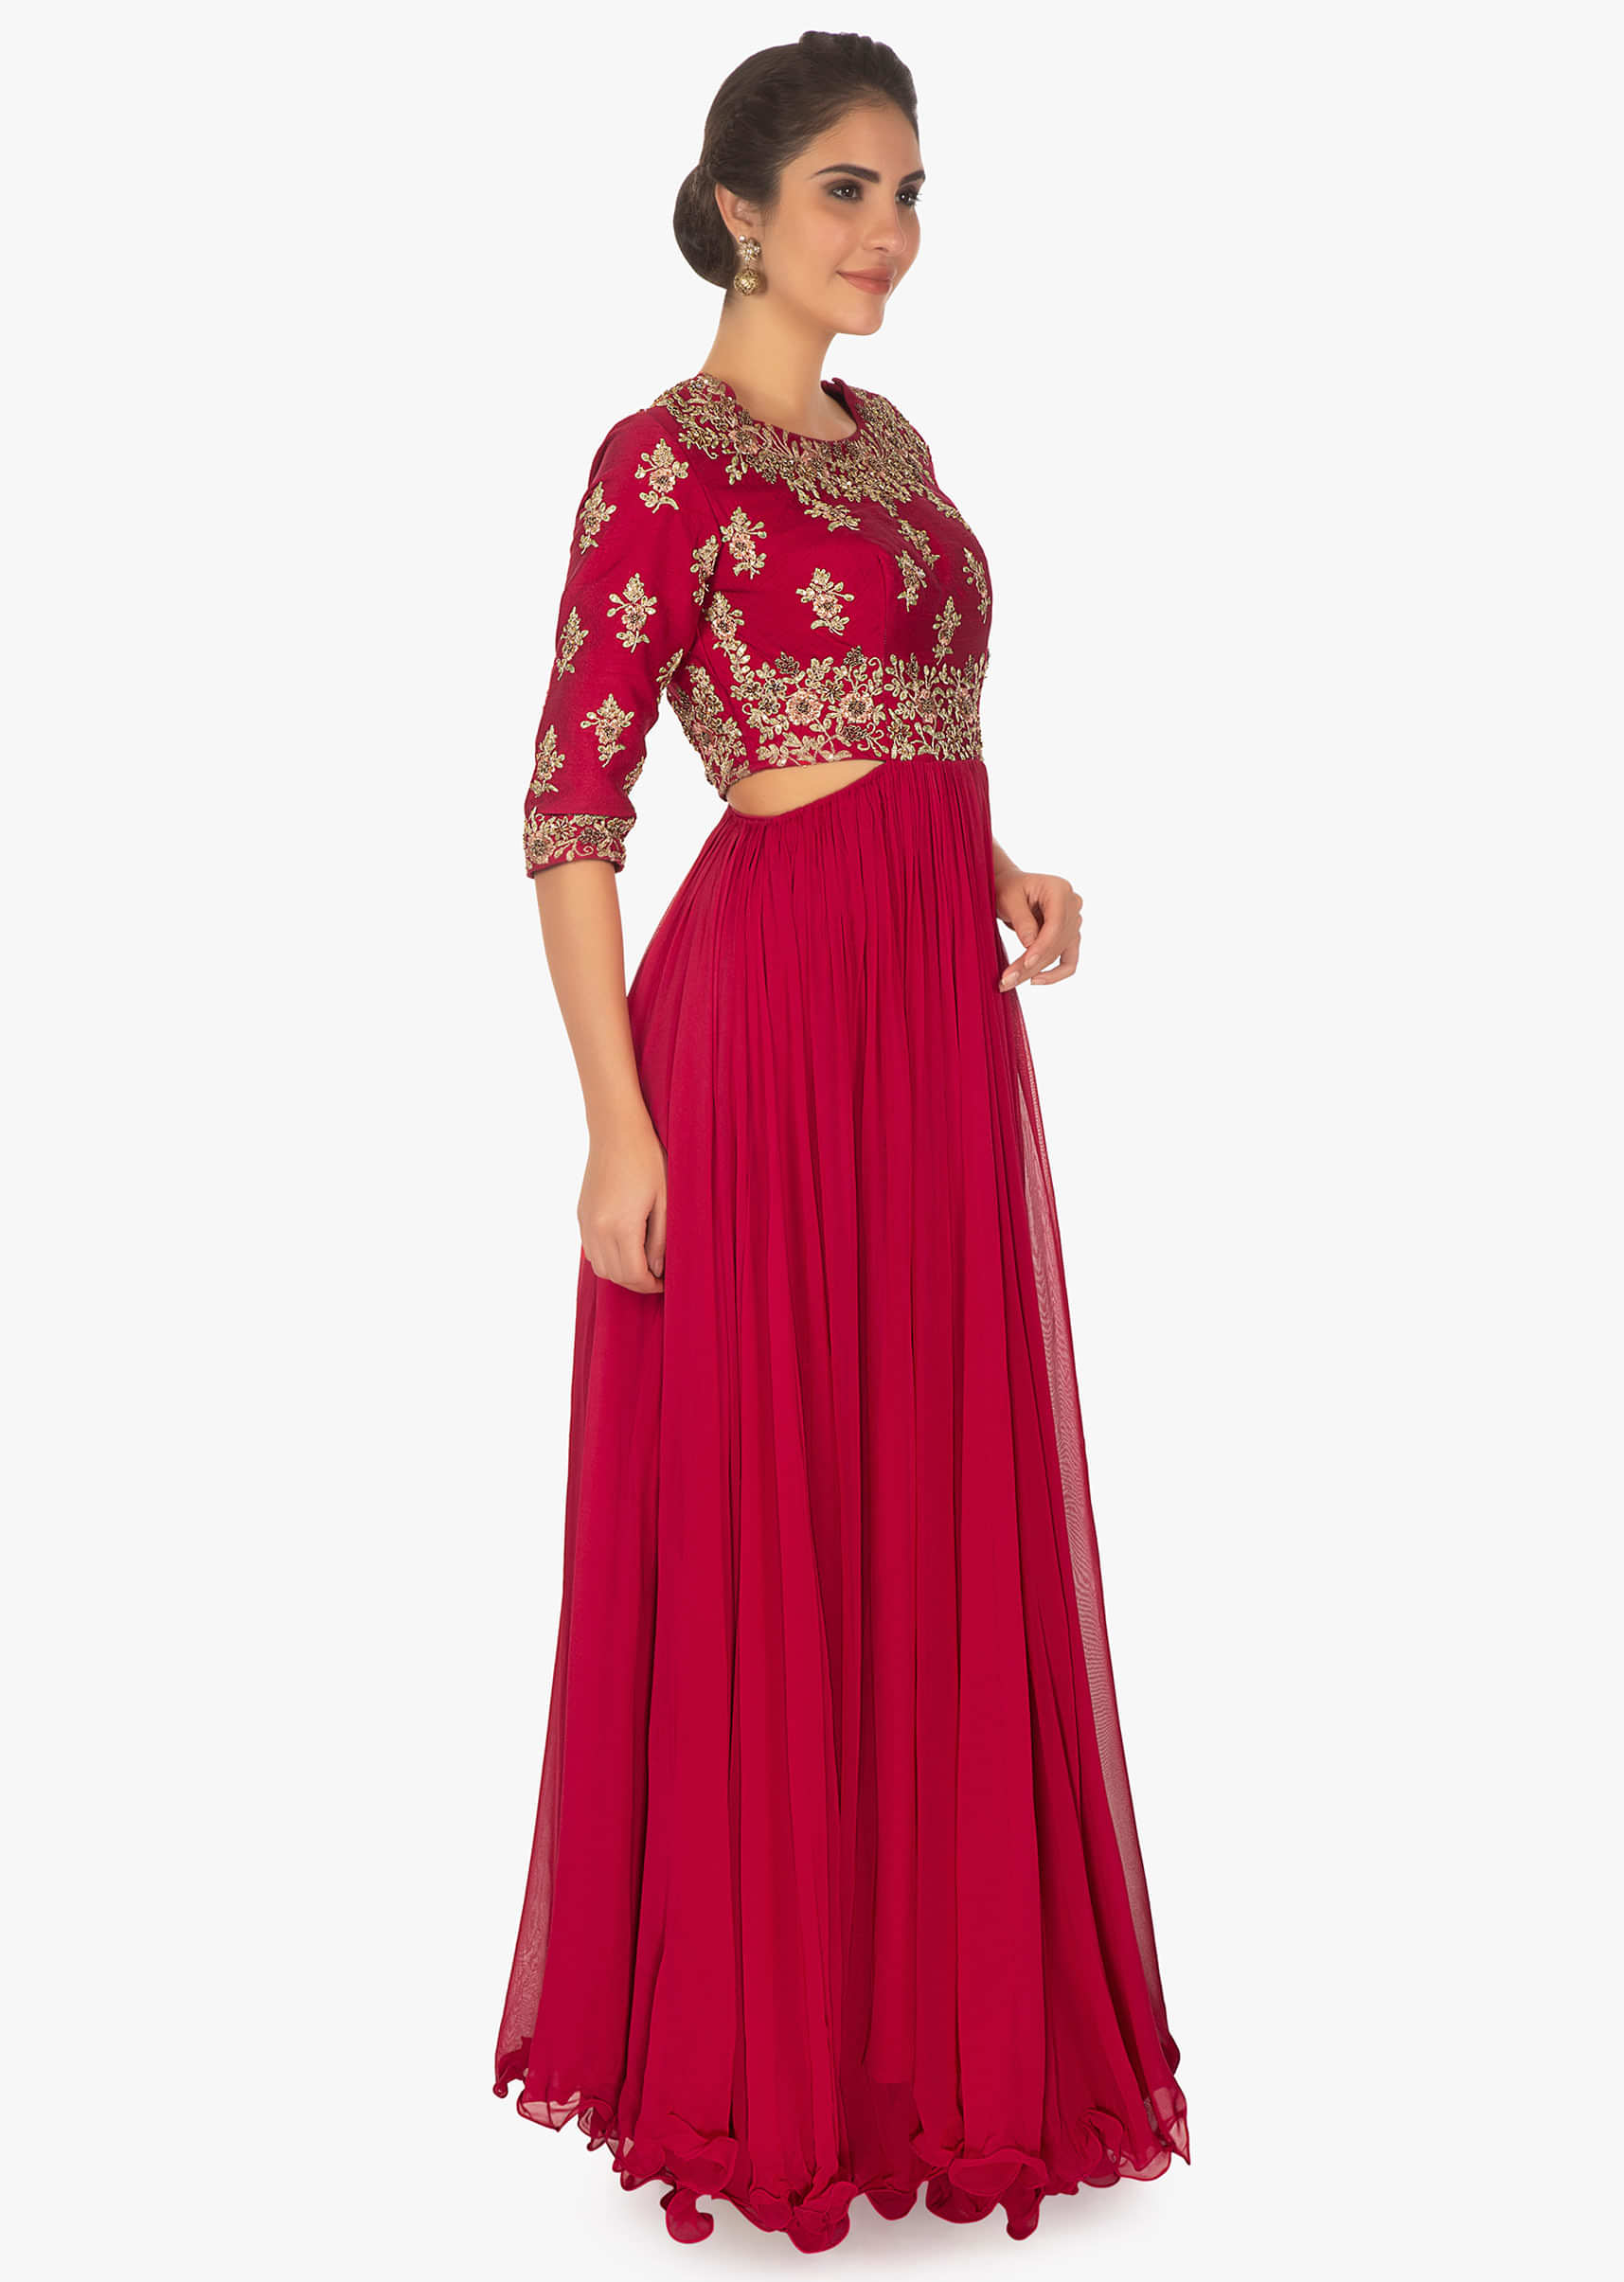 Red tunic dress with embellished bodice and side cut outs